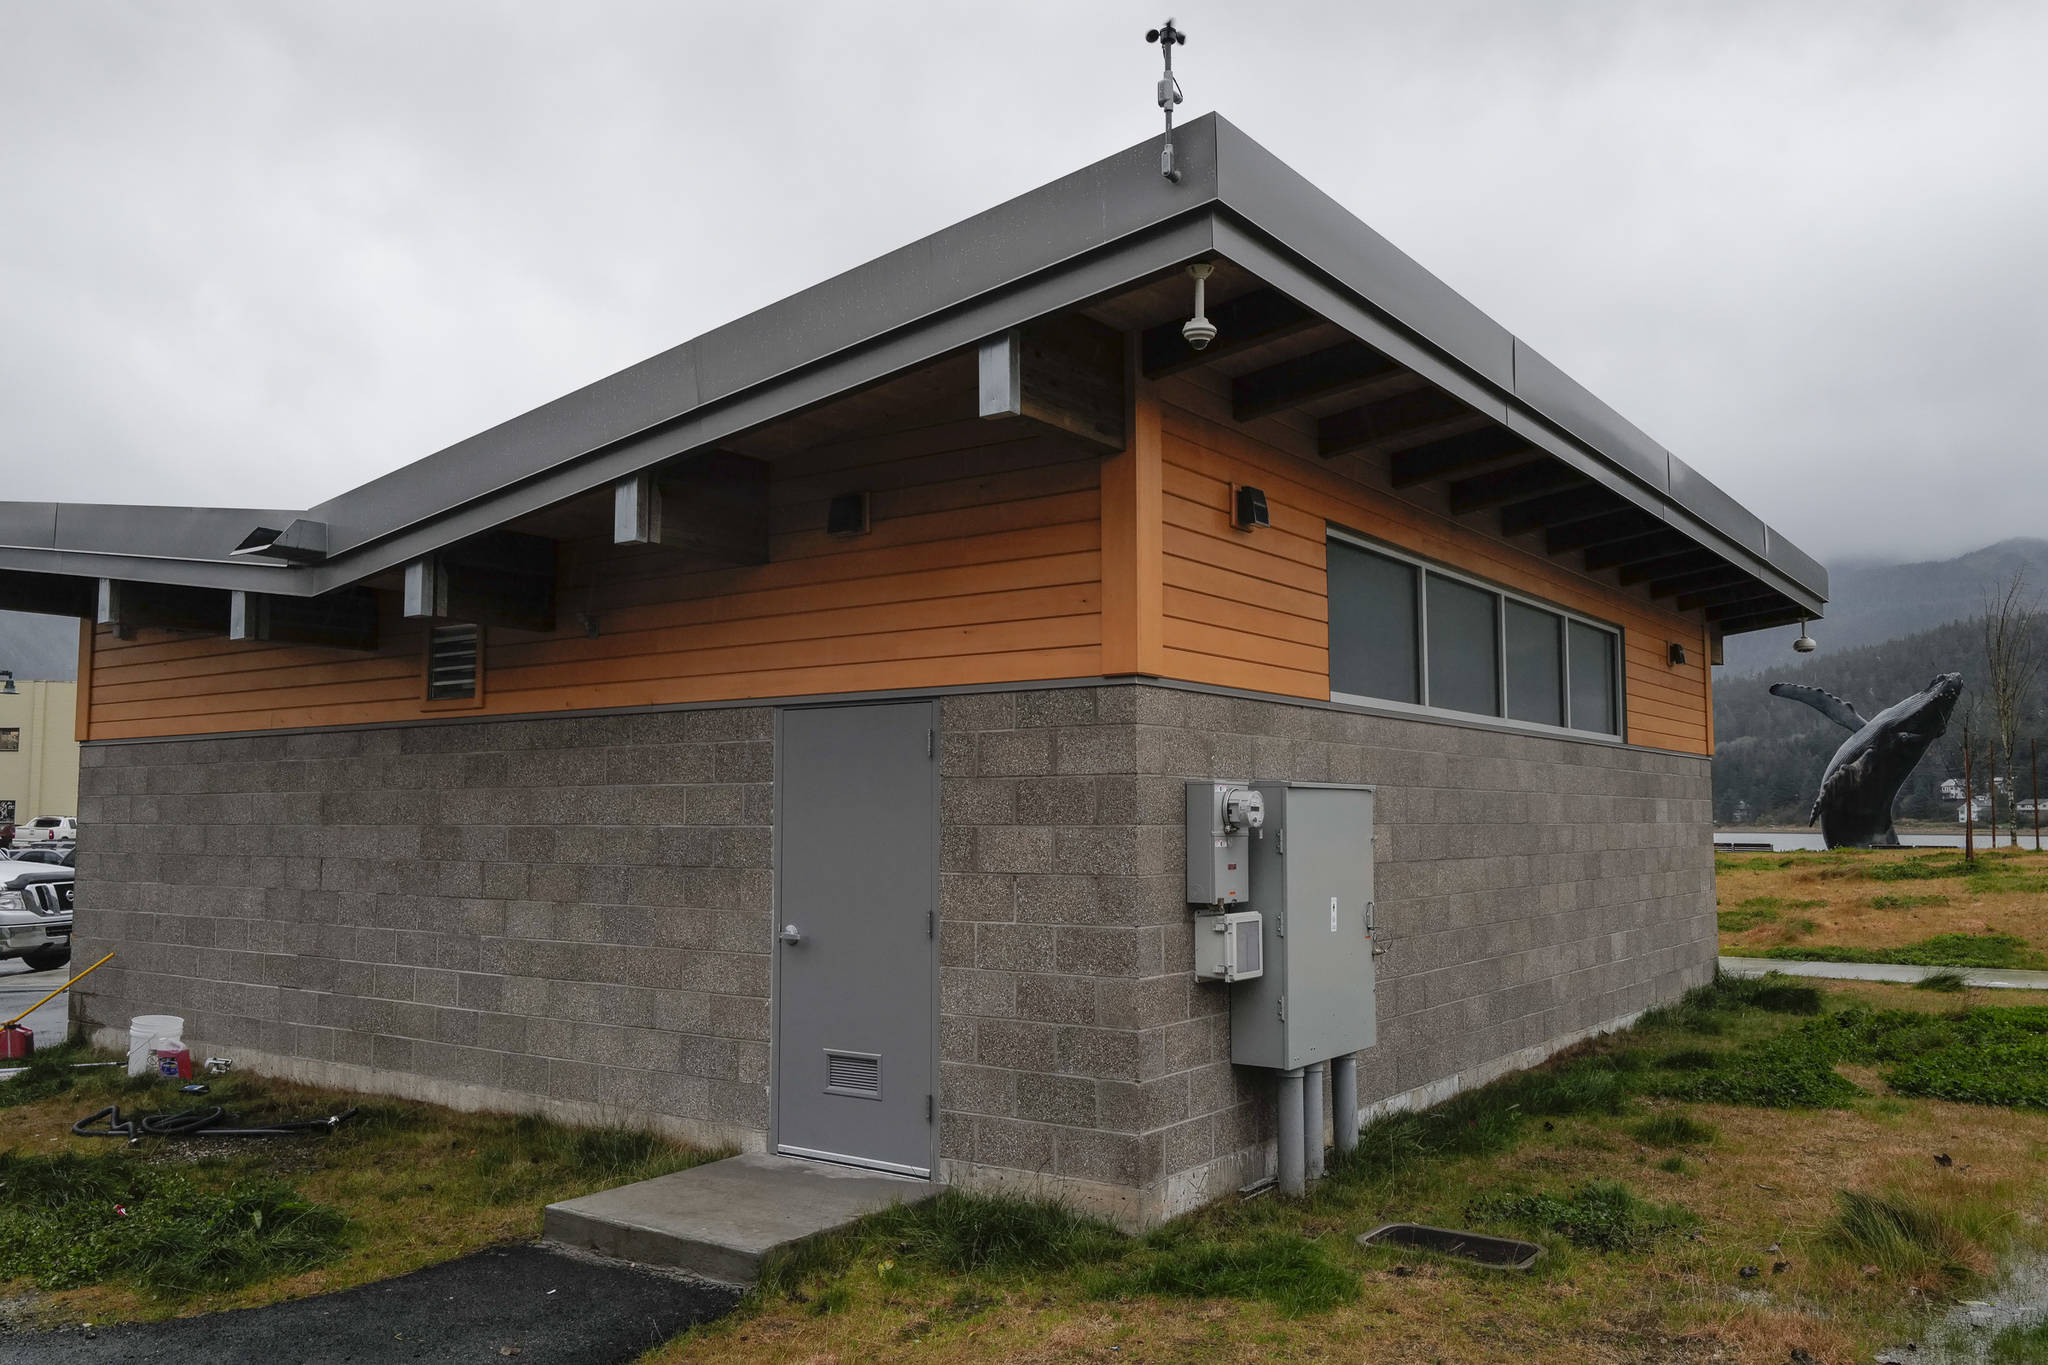 The wastewater pumps were overwelmed during last weekends storm and caused a backup of sewage into the Mayor Bill Overstreet Park utilities building. (Michael Penn | Juneau Empire)